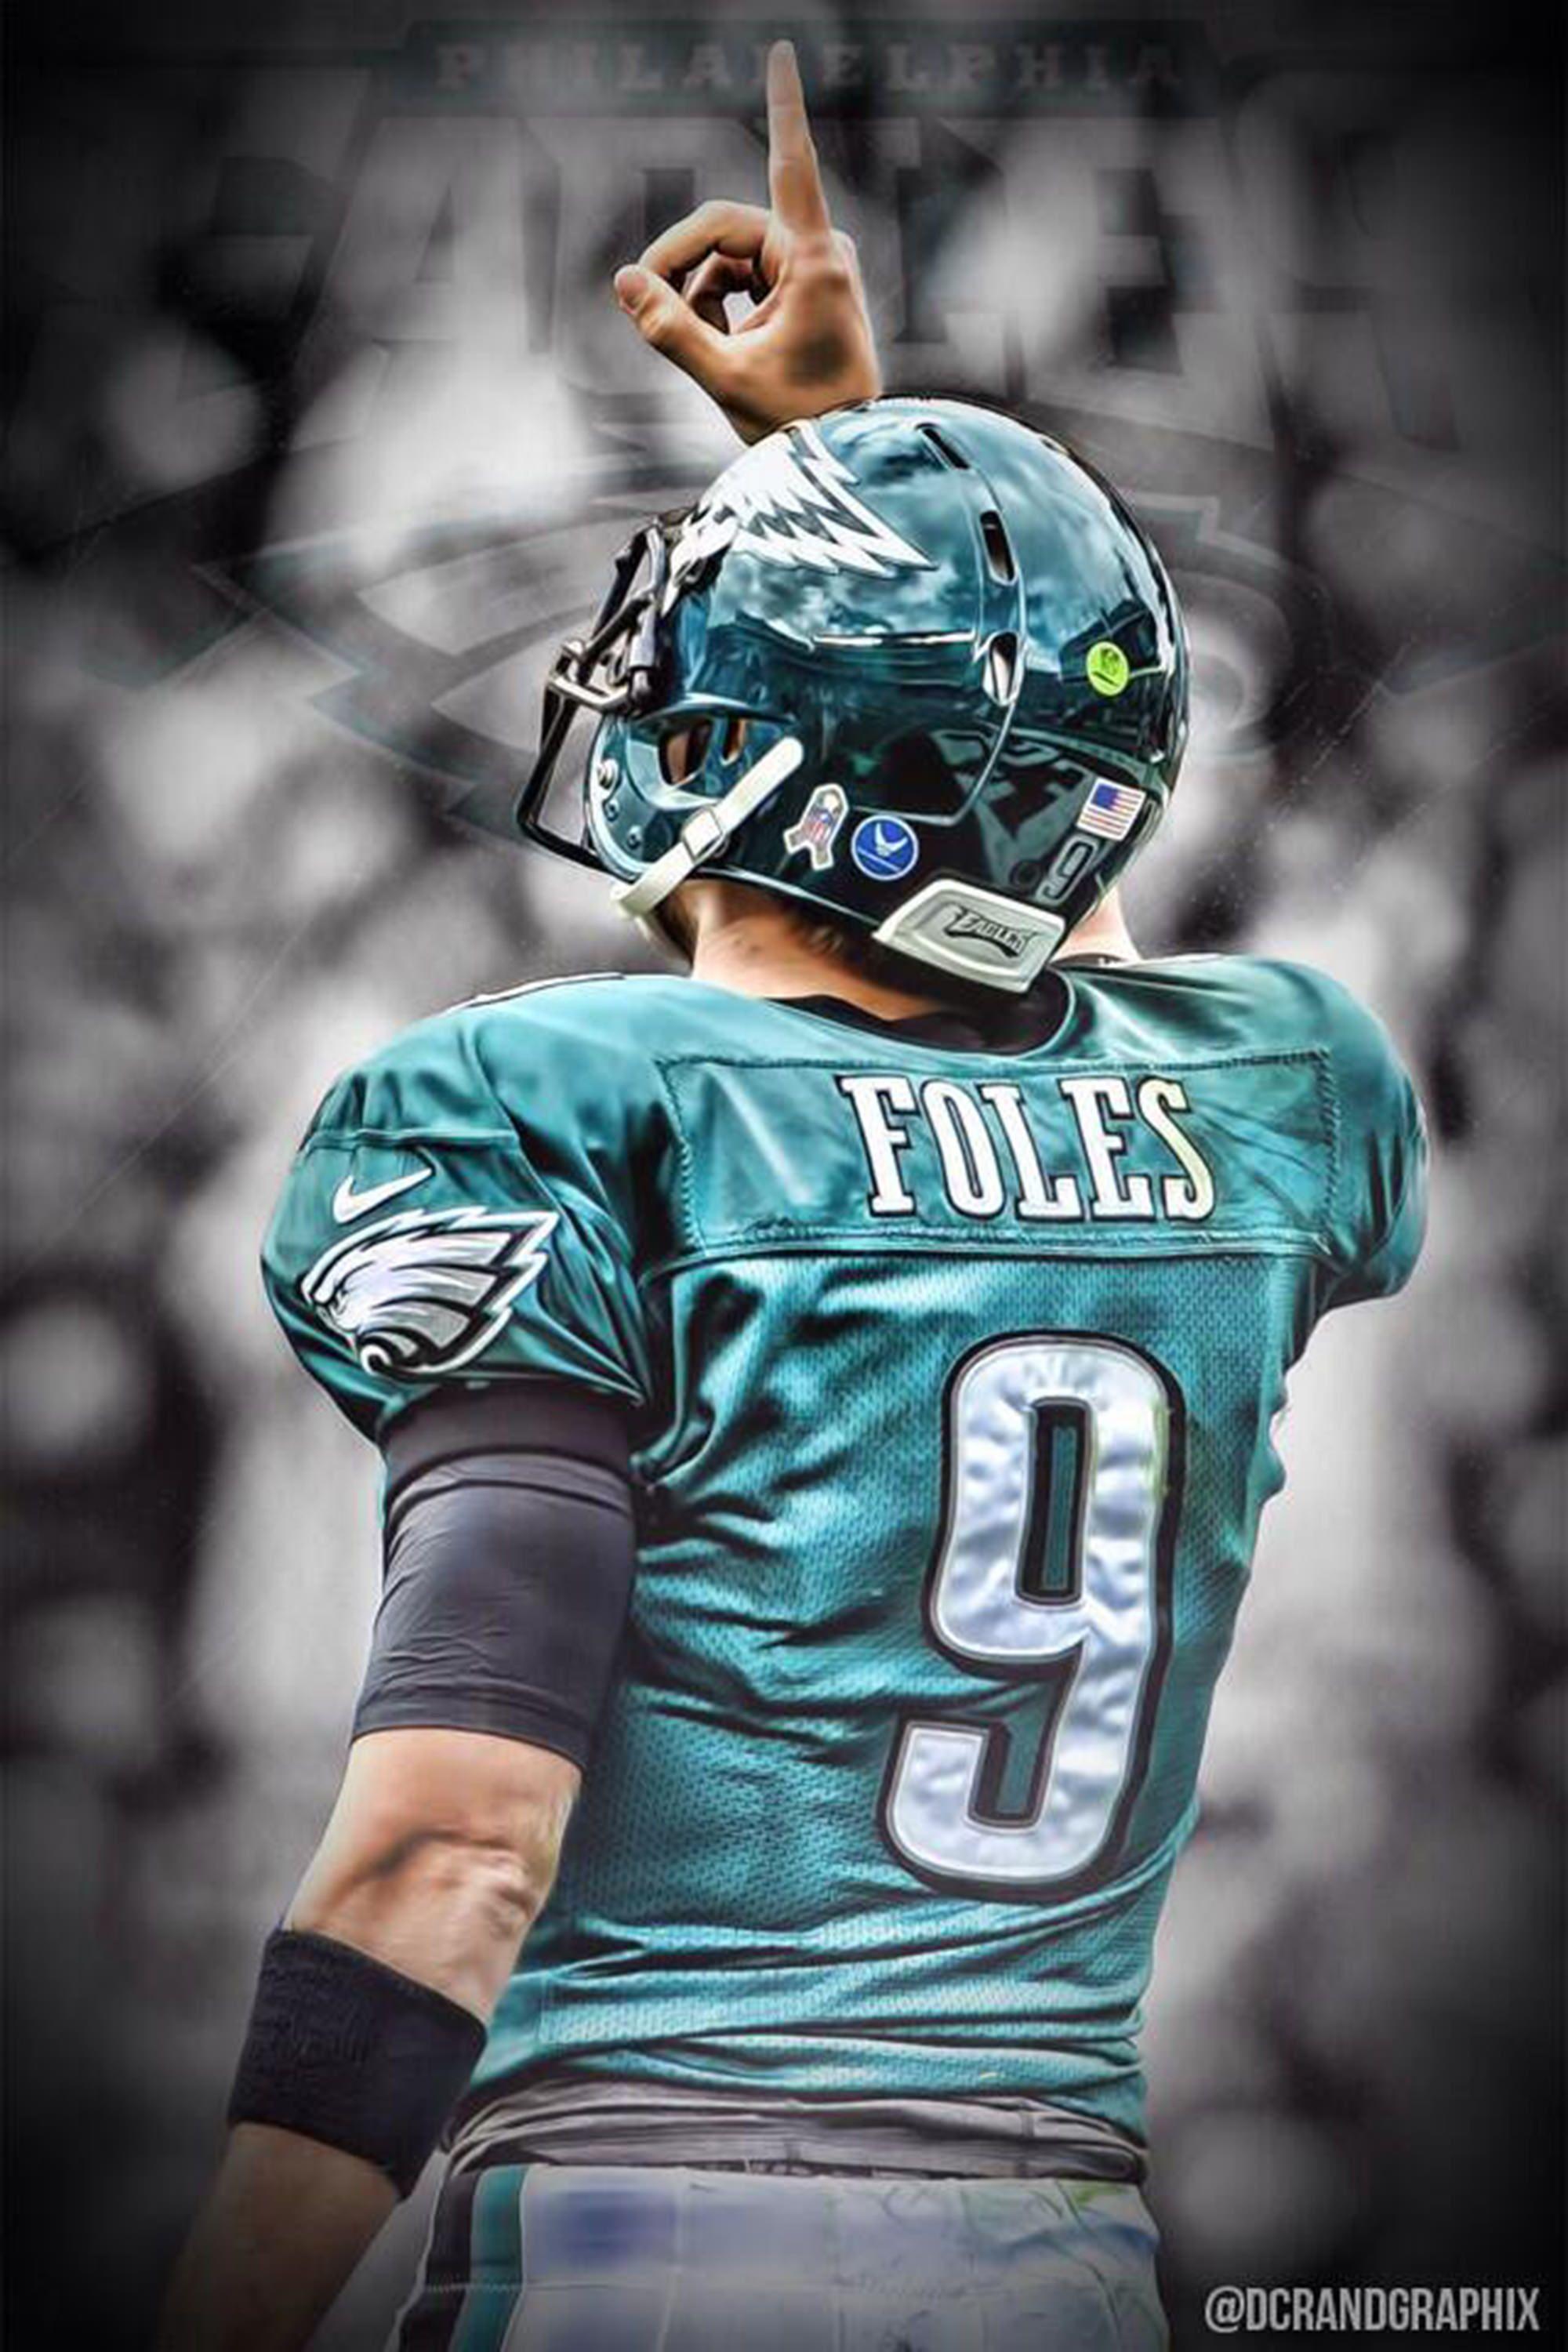 Request: Does anyone have a dope Nick Foles wallpaper? I need to